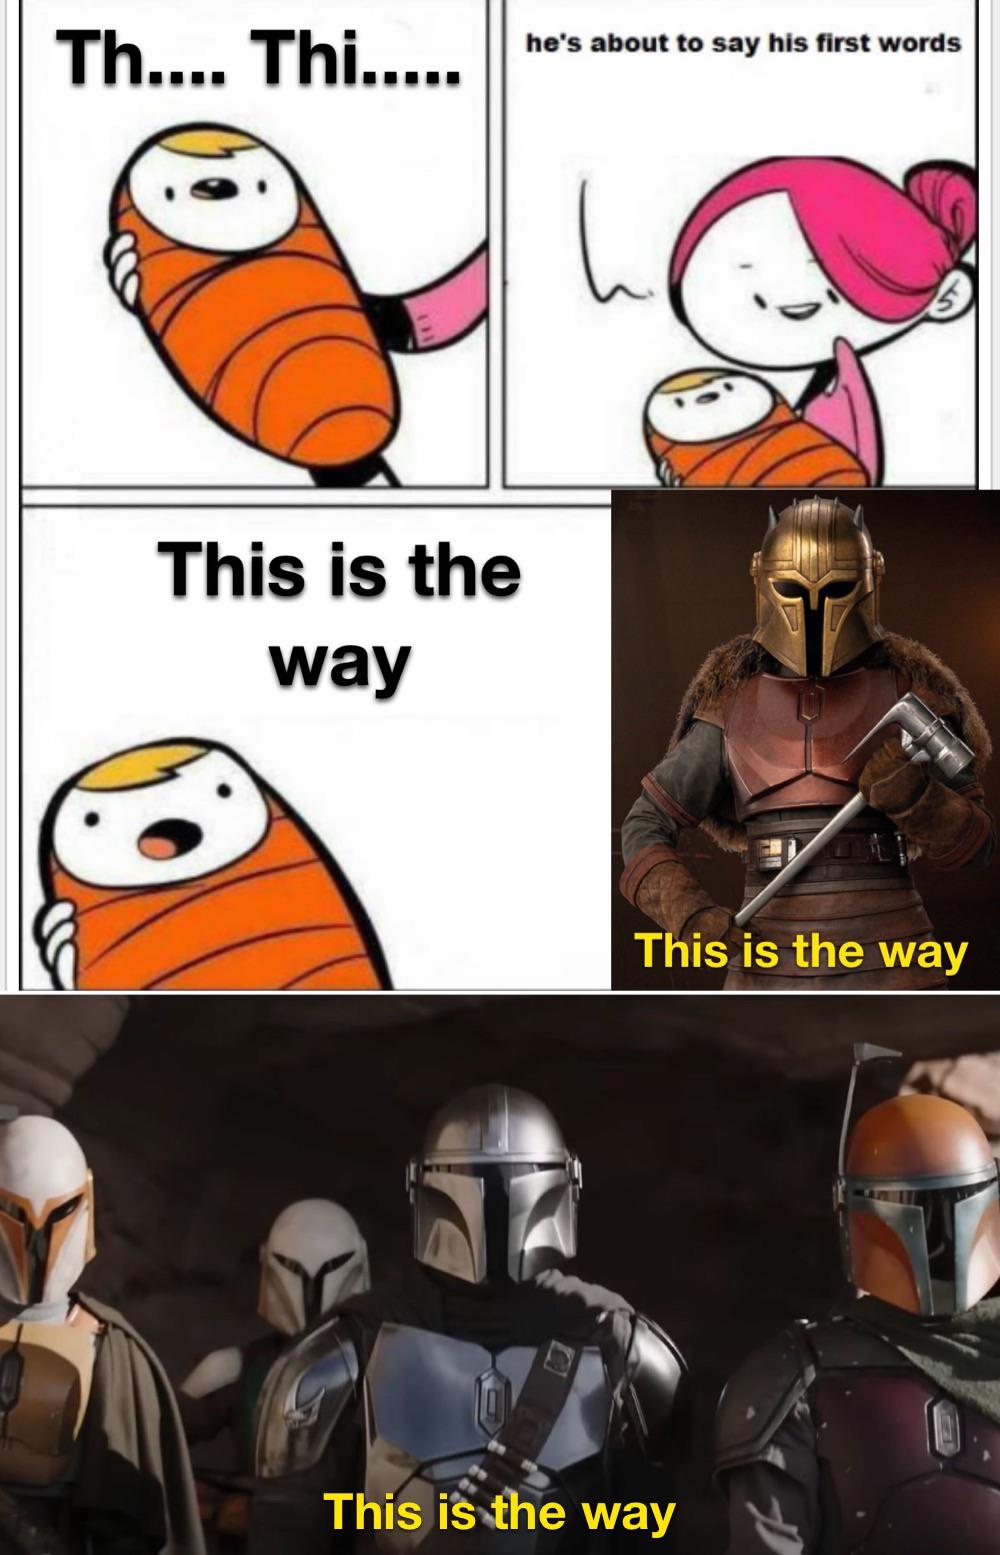 dank memes - mandalorian season 3 mandos - Th.... Thi. This is the way he's about to say his first words This is the way This is the way